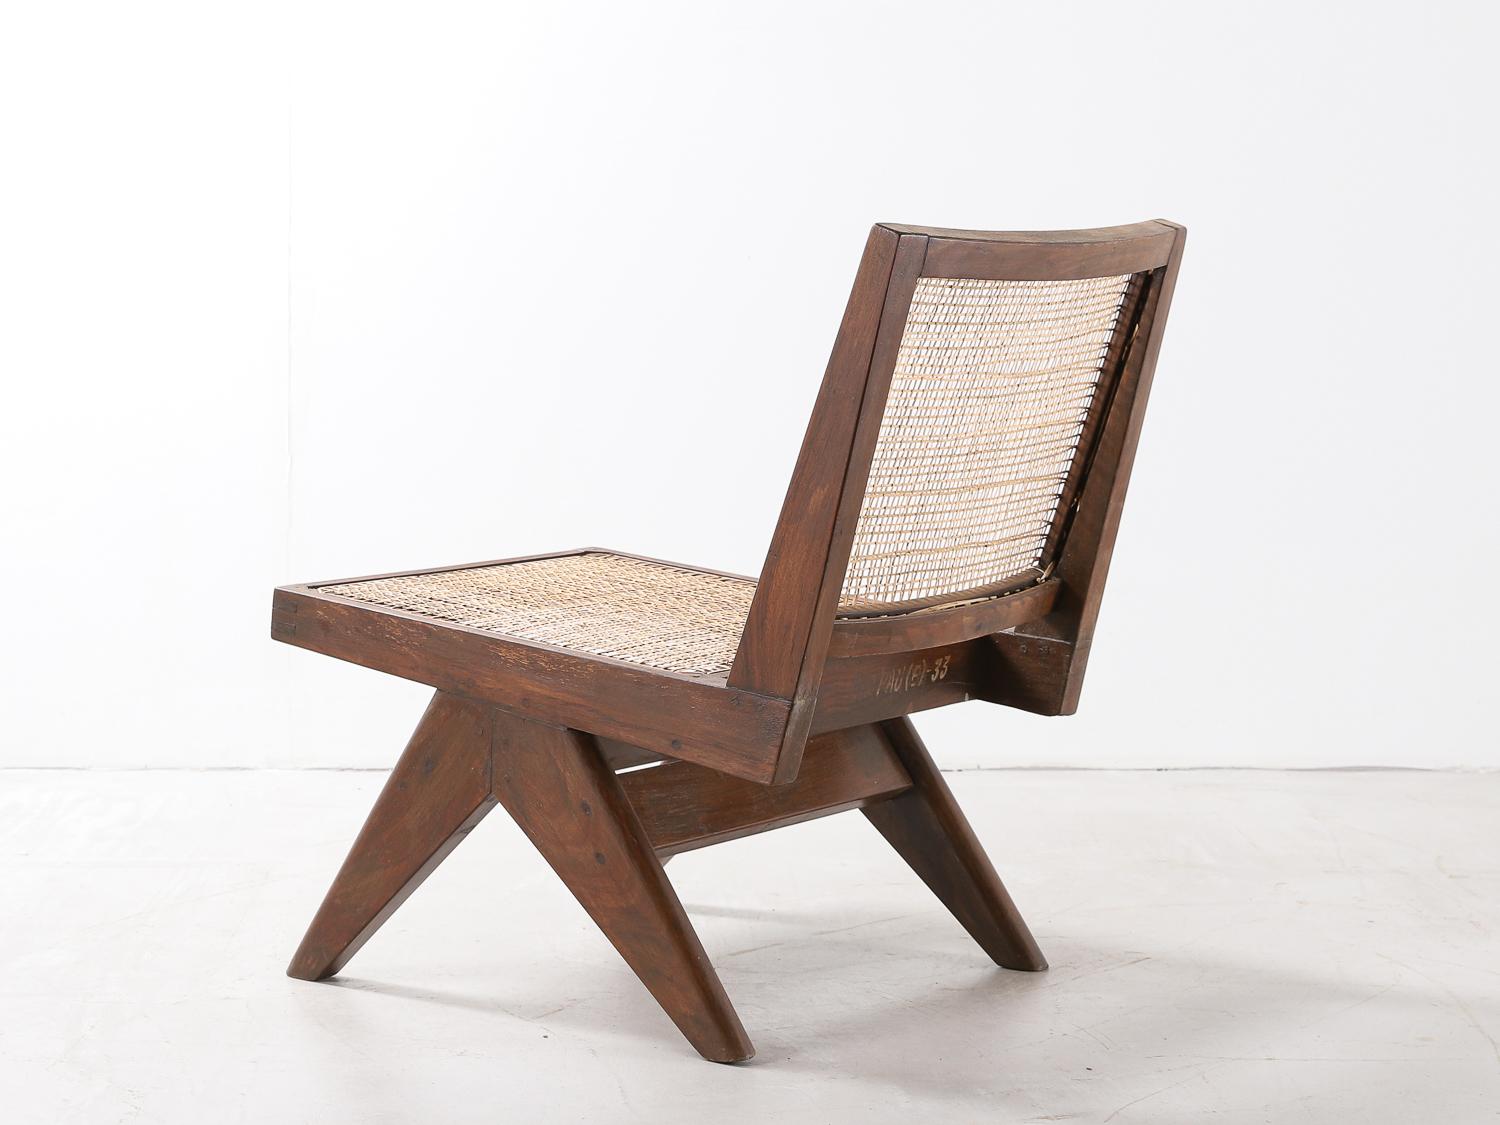 Indian Pierre Jeanneret 'Armless Easy Chair', Model No. PJ-SI-35-A For Sale